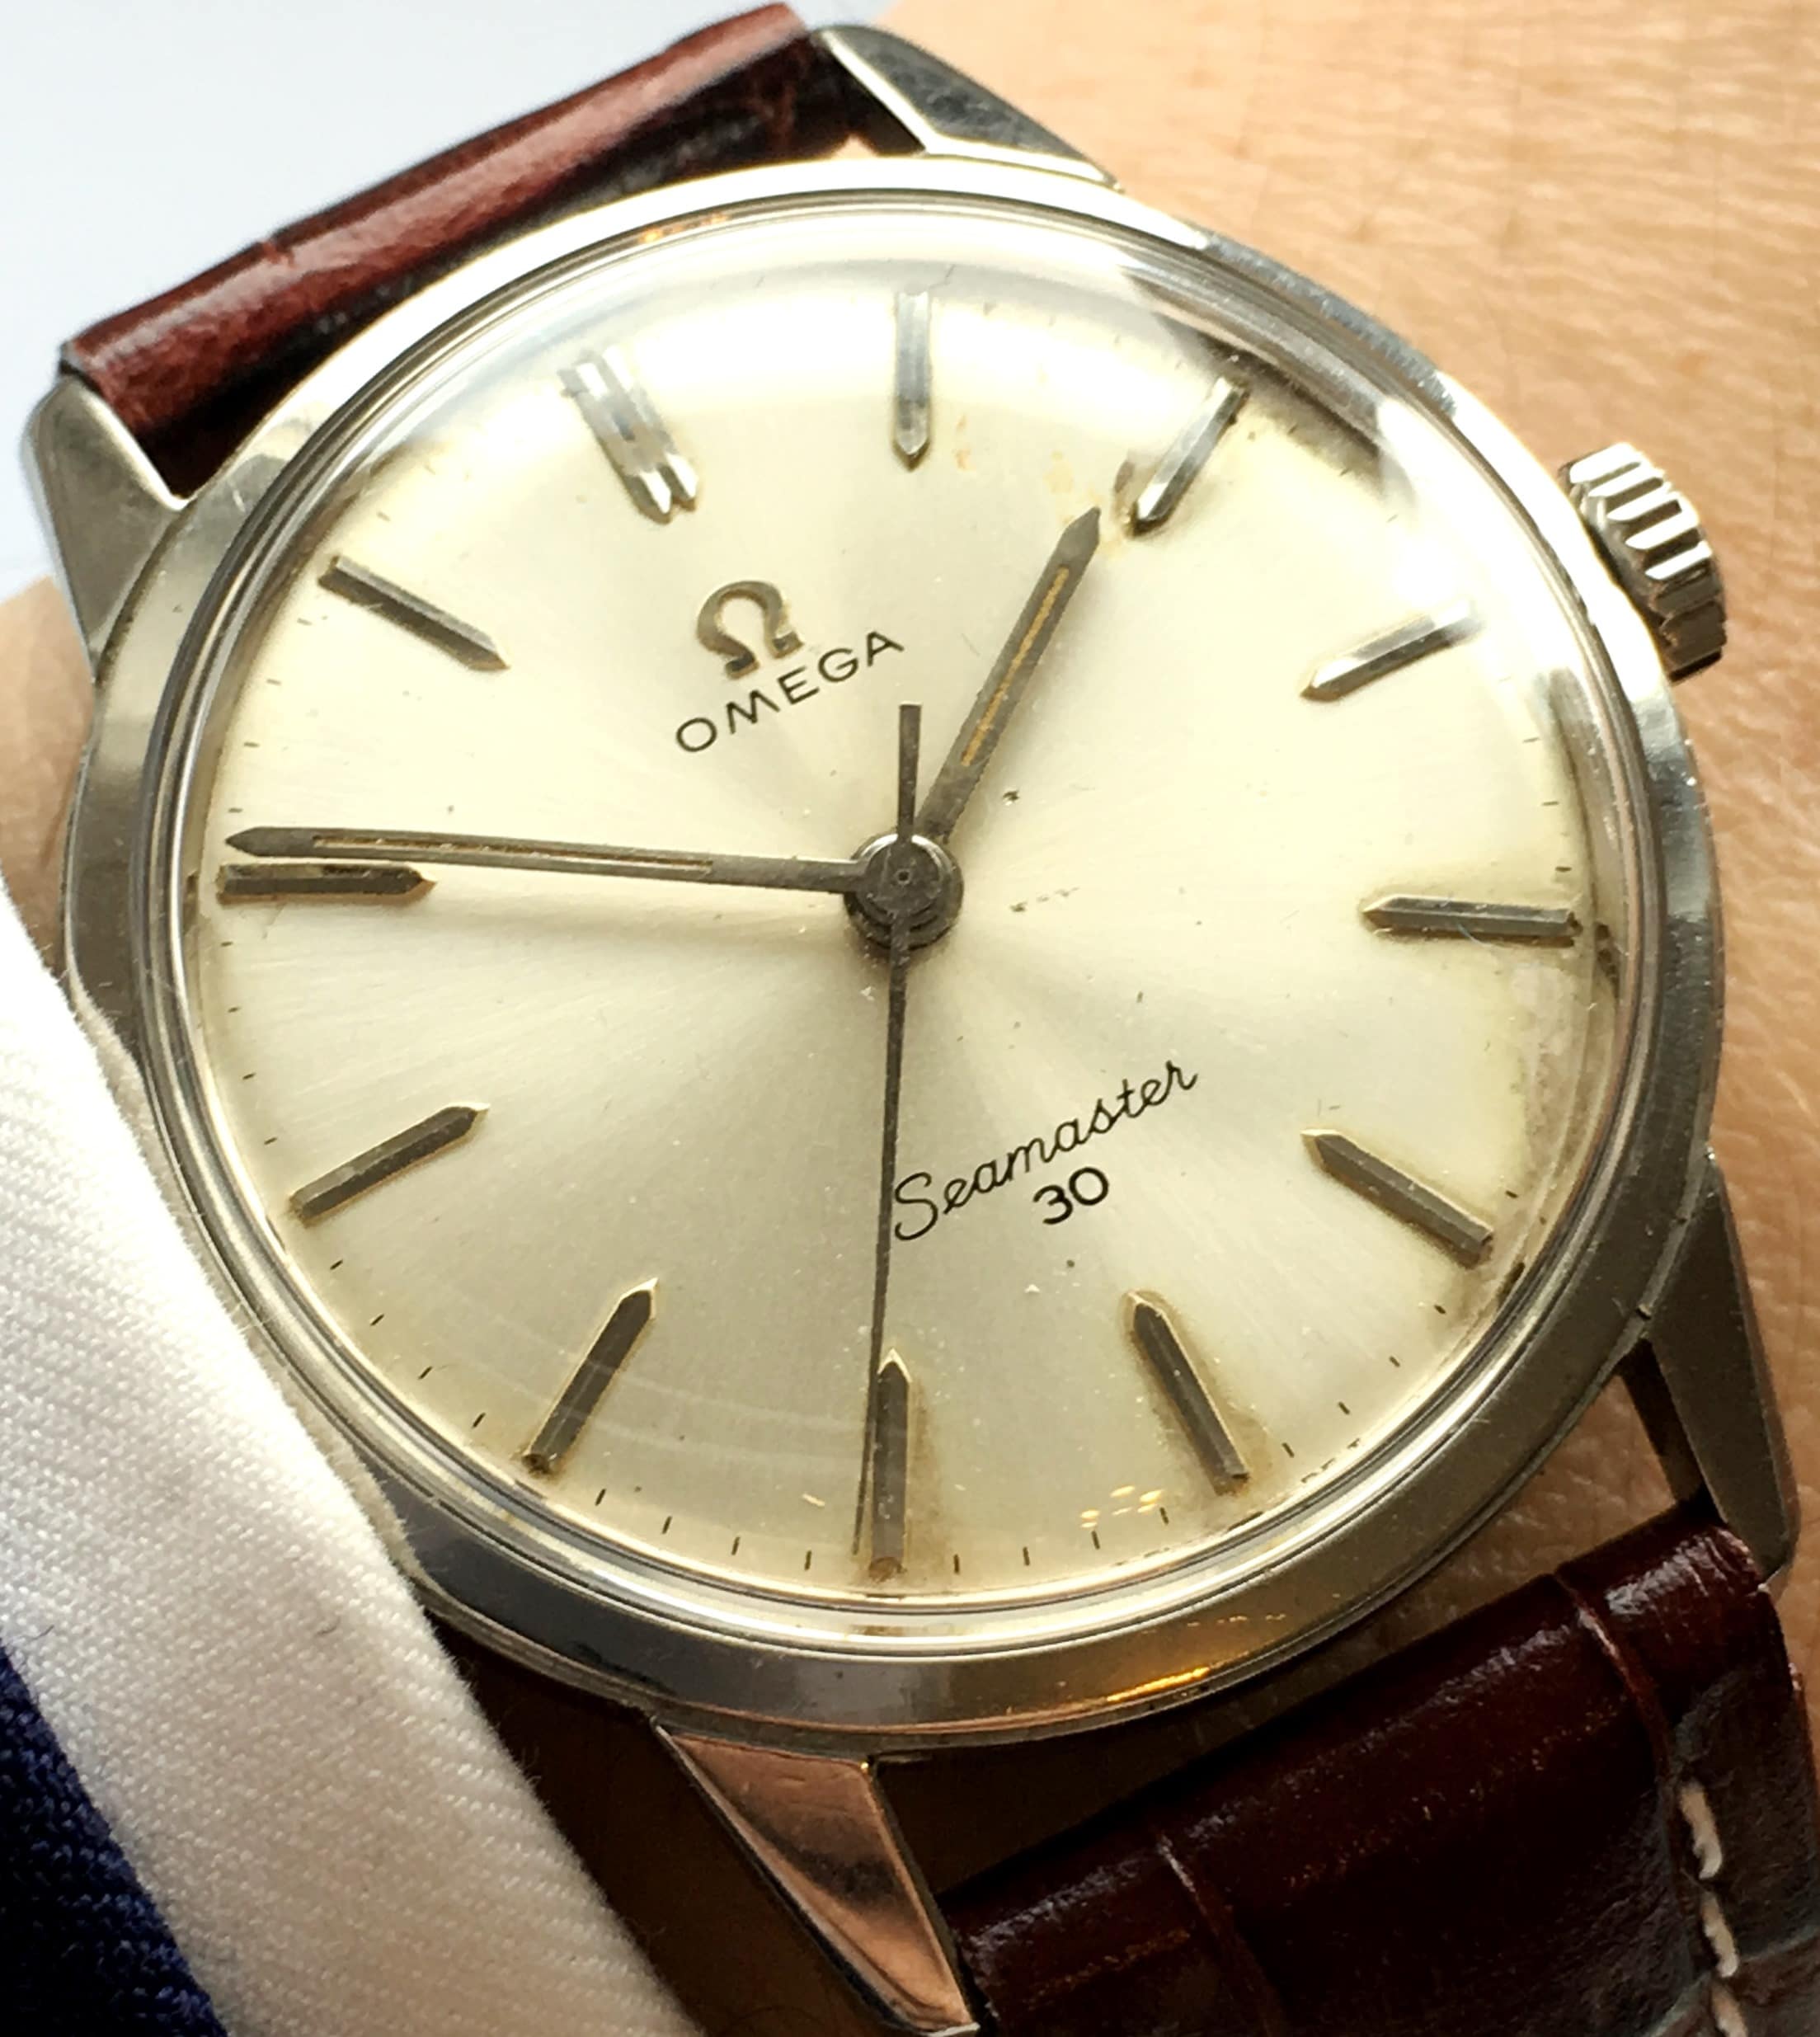 seamaster 30 review